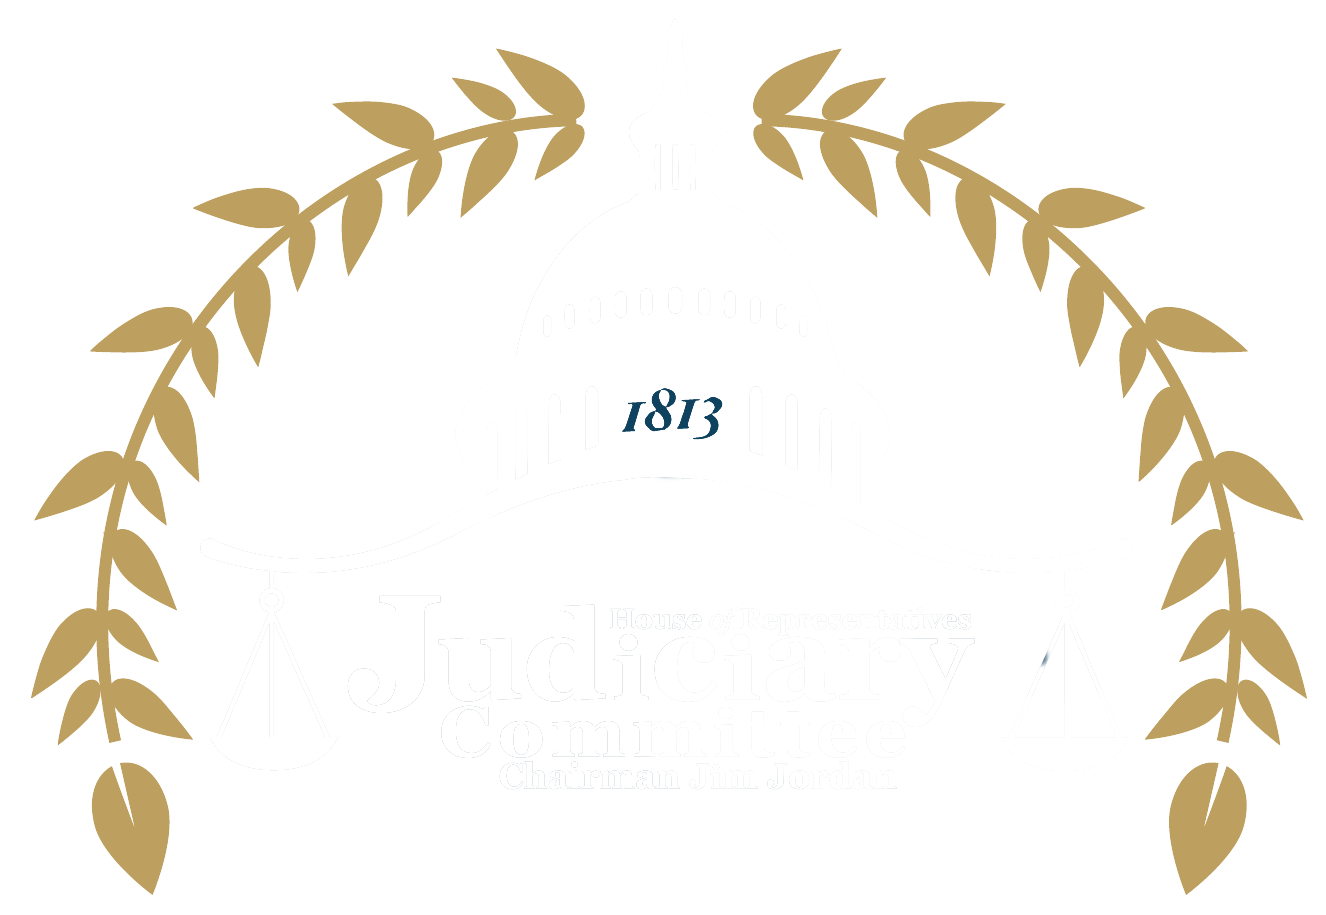 House Judiciary Committee Republicans logo